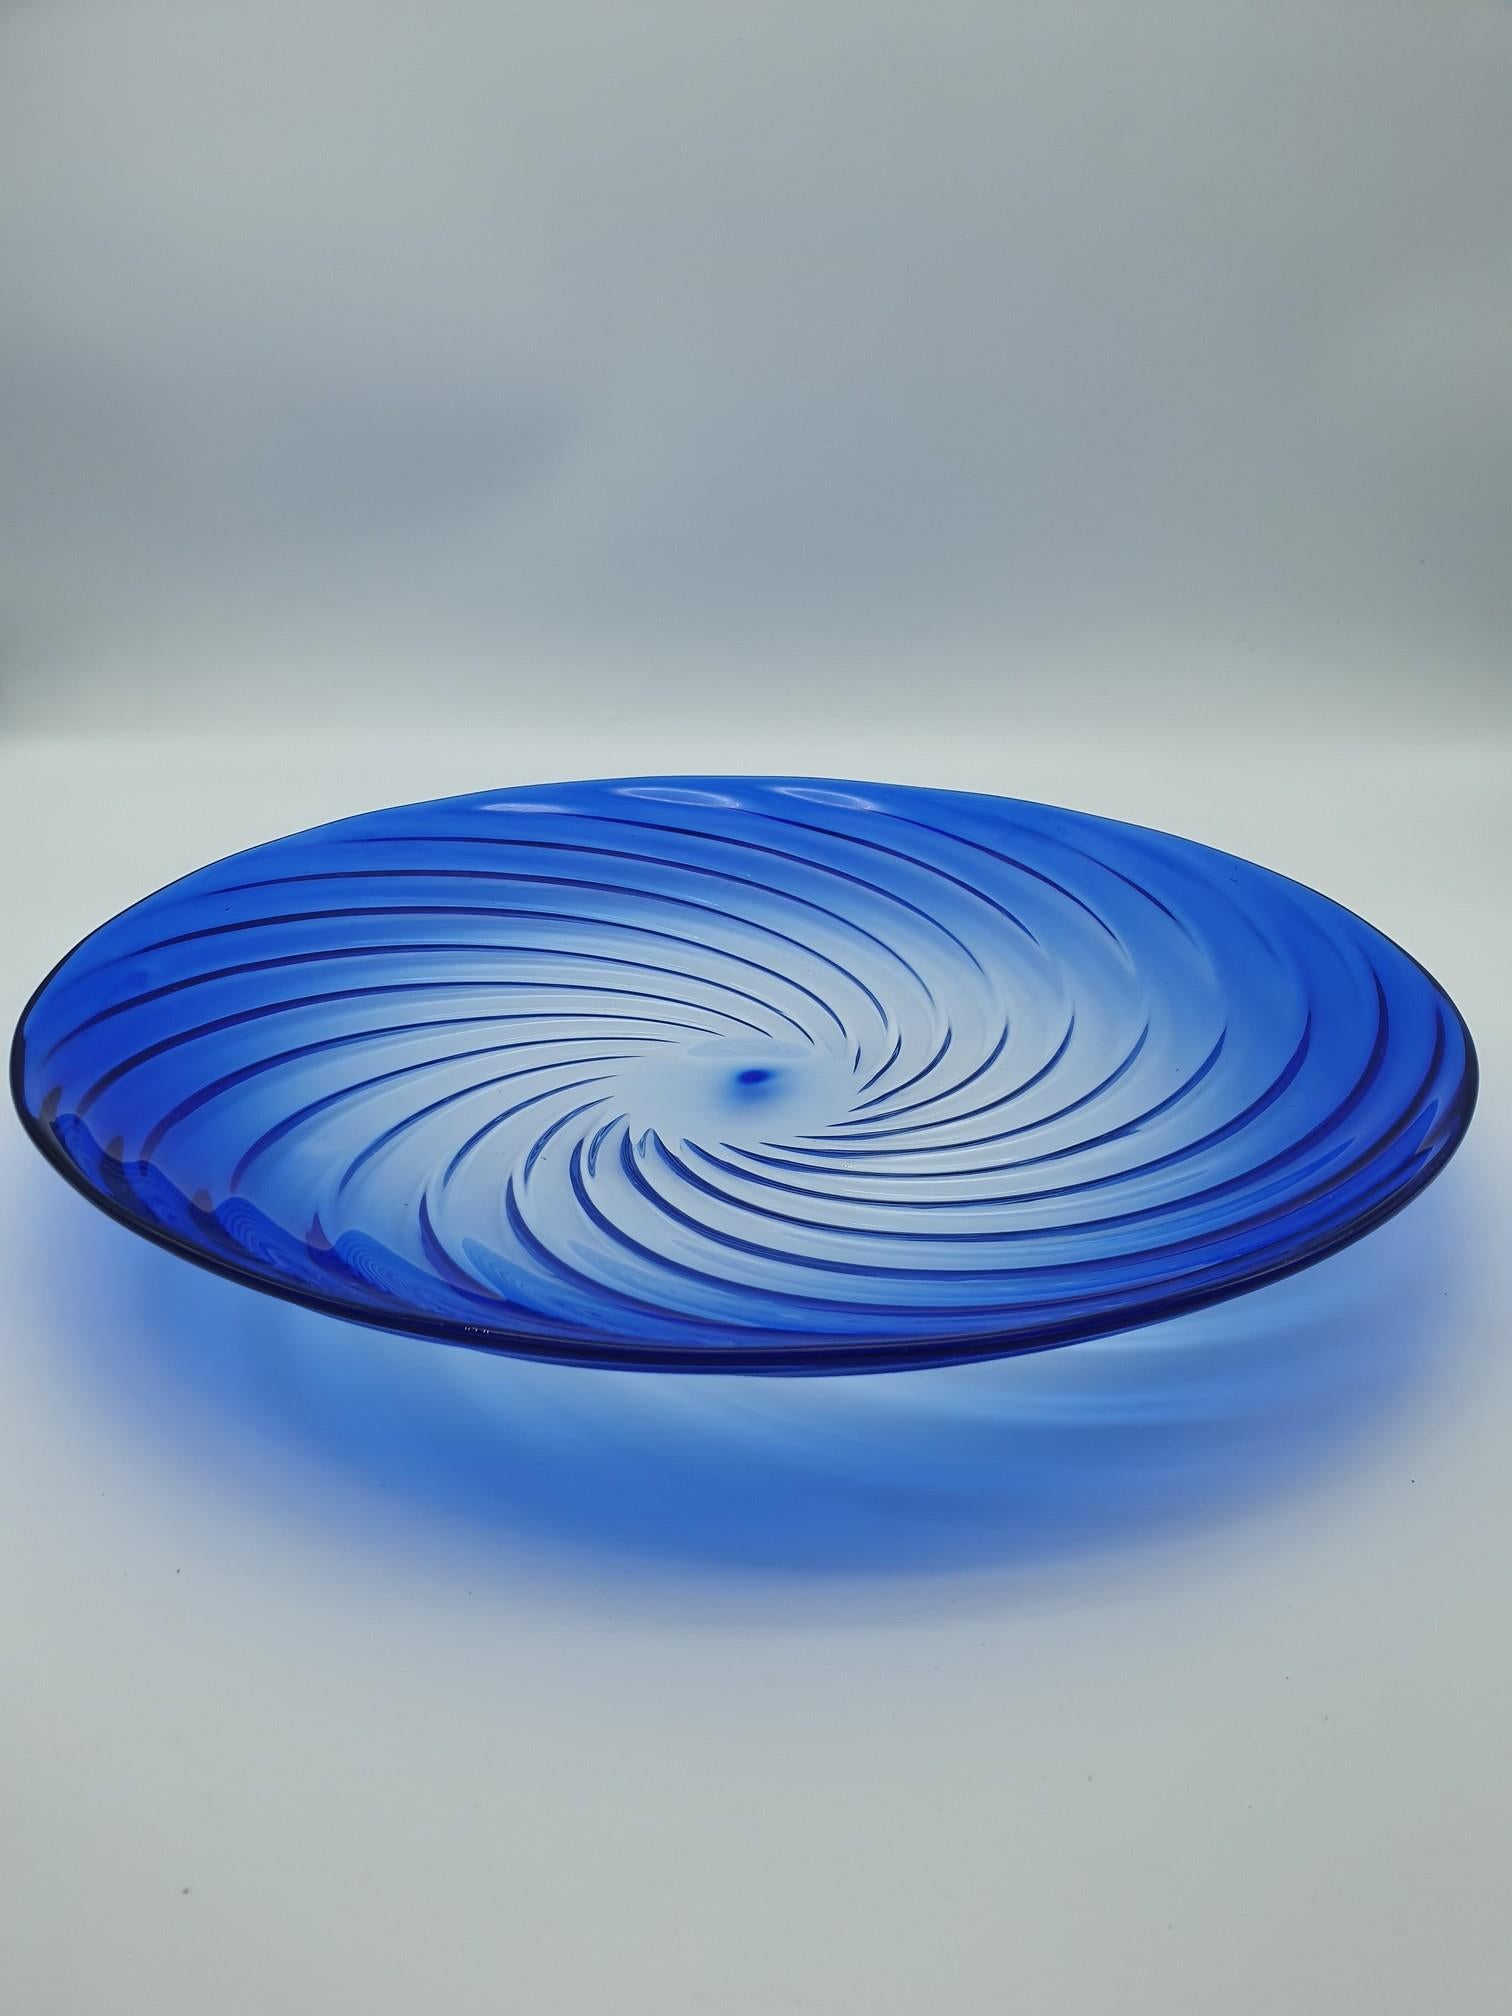 Italian Modern Murano Glass Centerpiece in Blue Color by Cenedese, 1980s For Sale